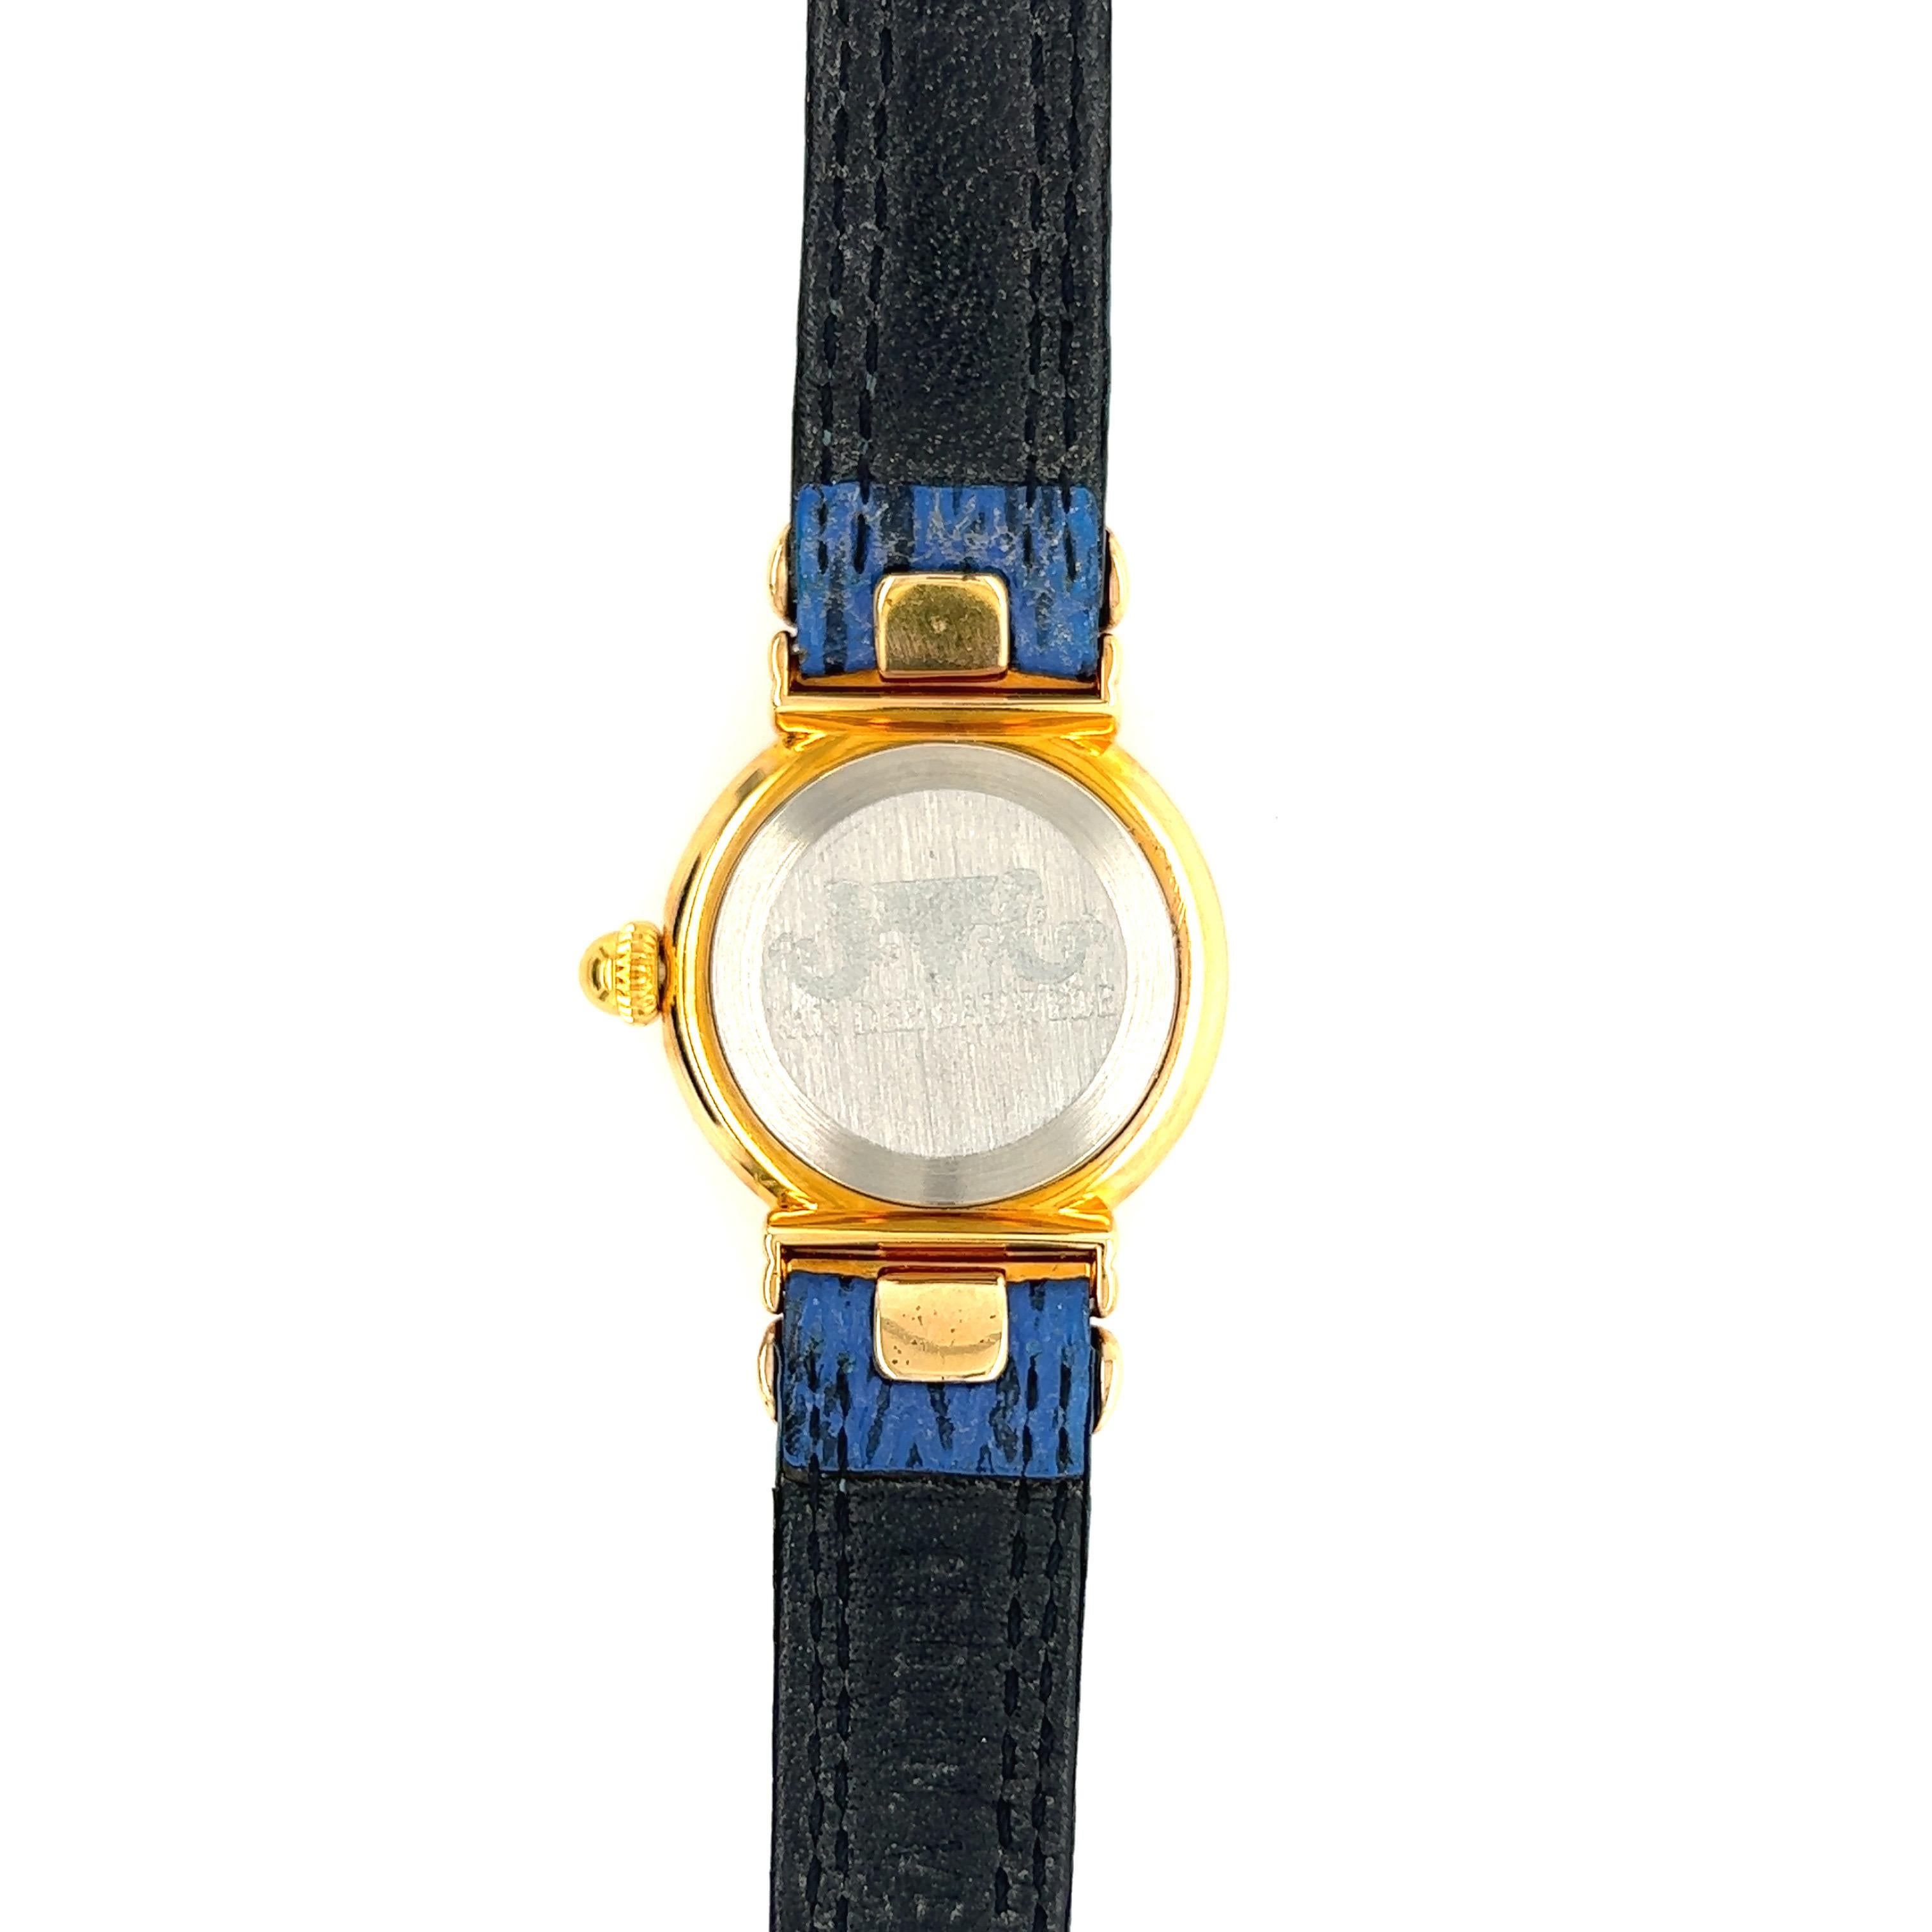 Van Der Bauwede Women's Watch, Swiss Made, Gold Plated Case

This women's wristwatch combines the charm of Art Deco with a contemporary aesthetic. The square gold-plated case is delicately adorned with geometric motifs reminiscent of the iconic Art